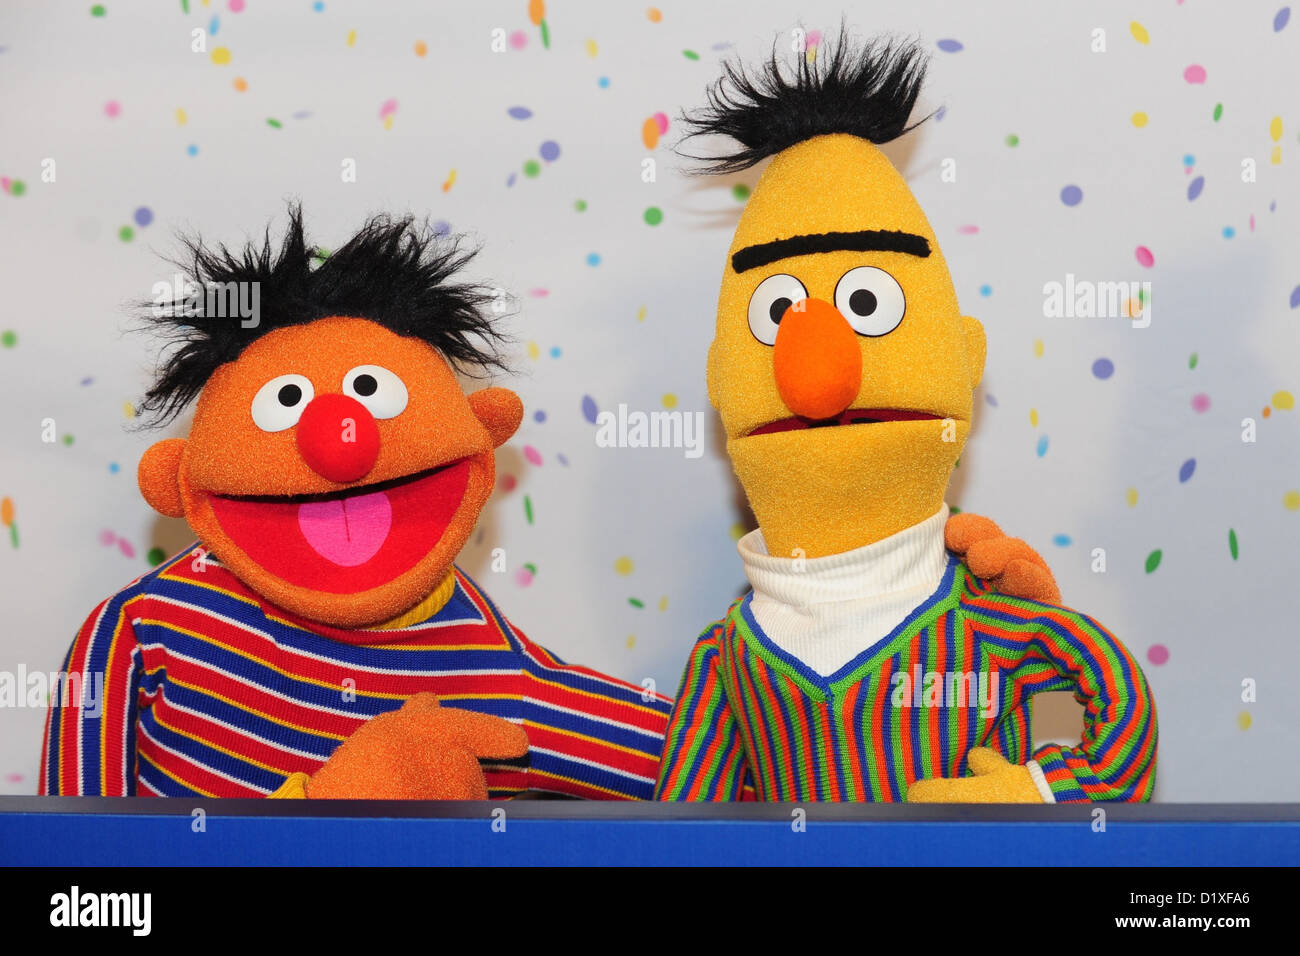 Sesame Street Muppets Ernie and Bert pose for photographs during a press conference on the 40th anniversary of the Sesame Street in Hamburg, Germany, 07 January 2013. On 8 January 1973, the children's television series Sesame Street premiered in Germany. Photo: Revierfoto Stock Photo